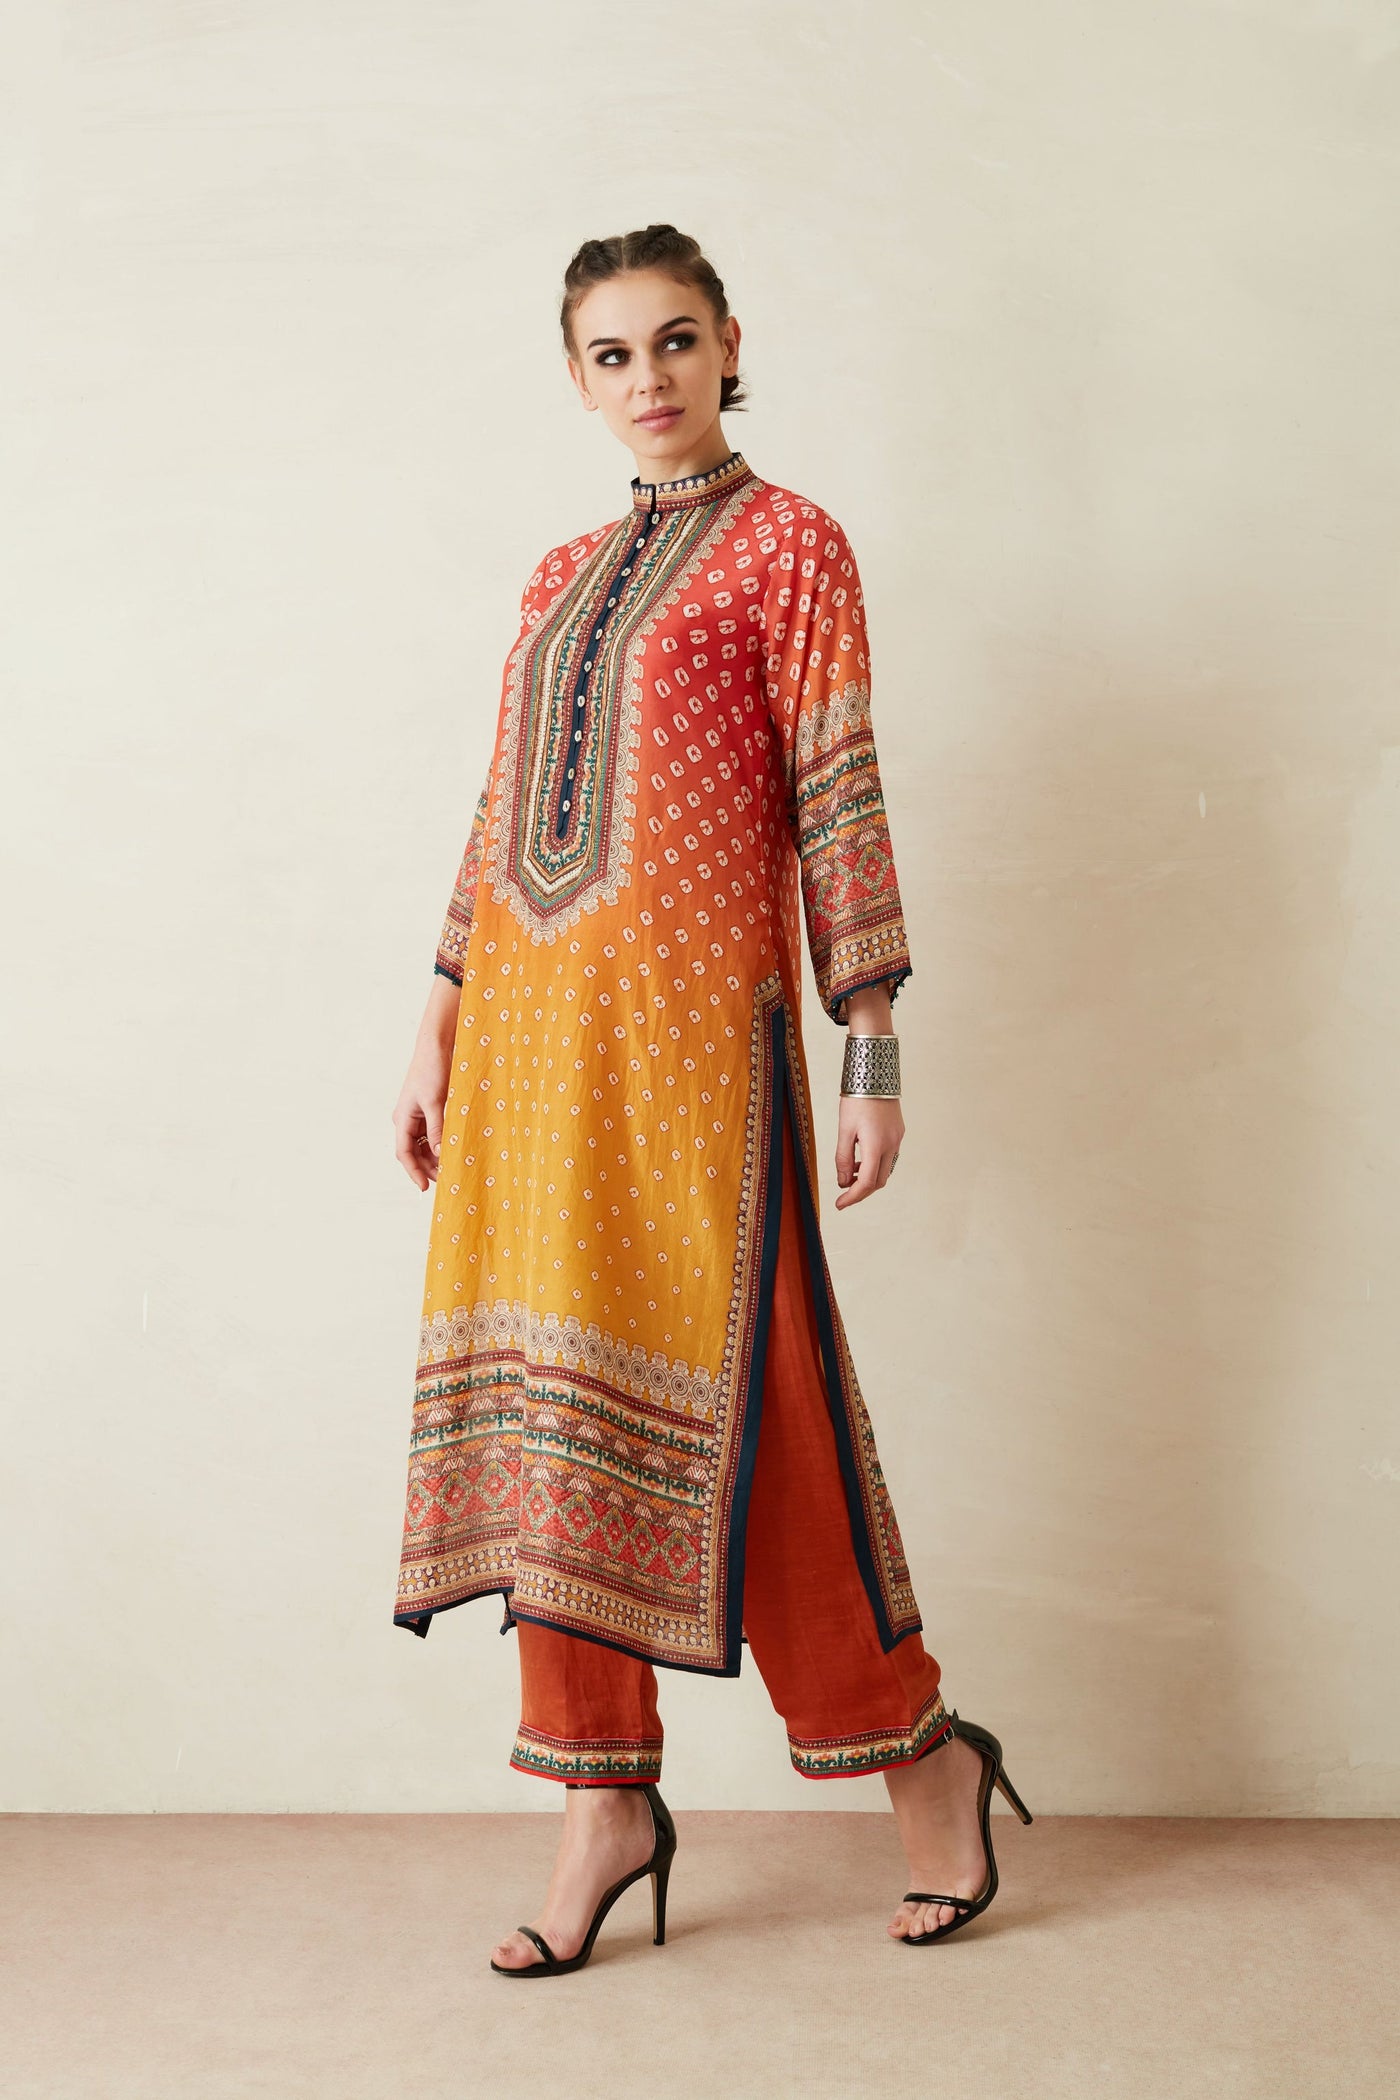 Ethnic Sunrise Print Kurta - Indian Clothing in Denver, CO, Aurora, CO, Boulder, CO, Fort Collins, CO, Colorado Springs, CO, Parker, CO, Highlands Ranch, CO, Cherry Creek, CO, Centennial, CO, and Longmont, CO. Nationwide shipping USA - India Fashion X